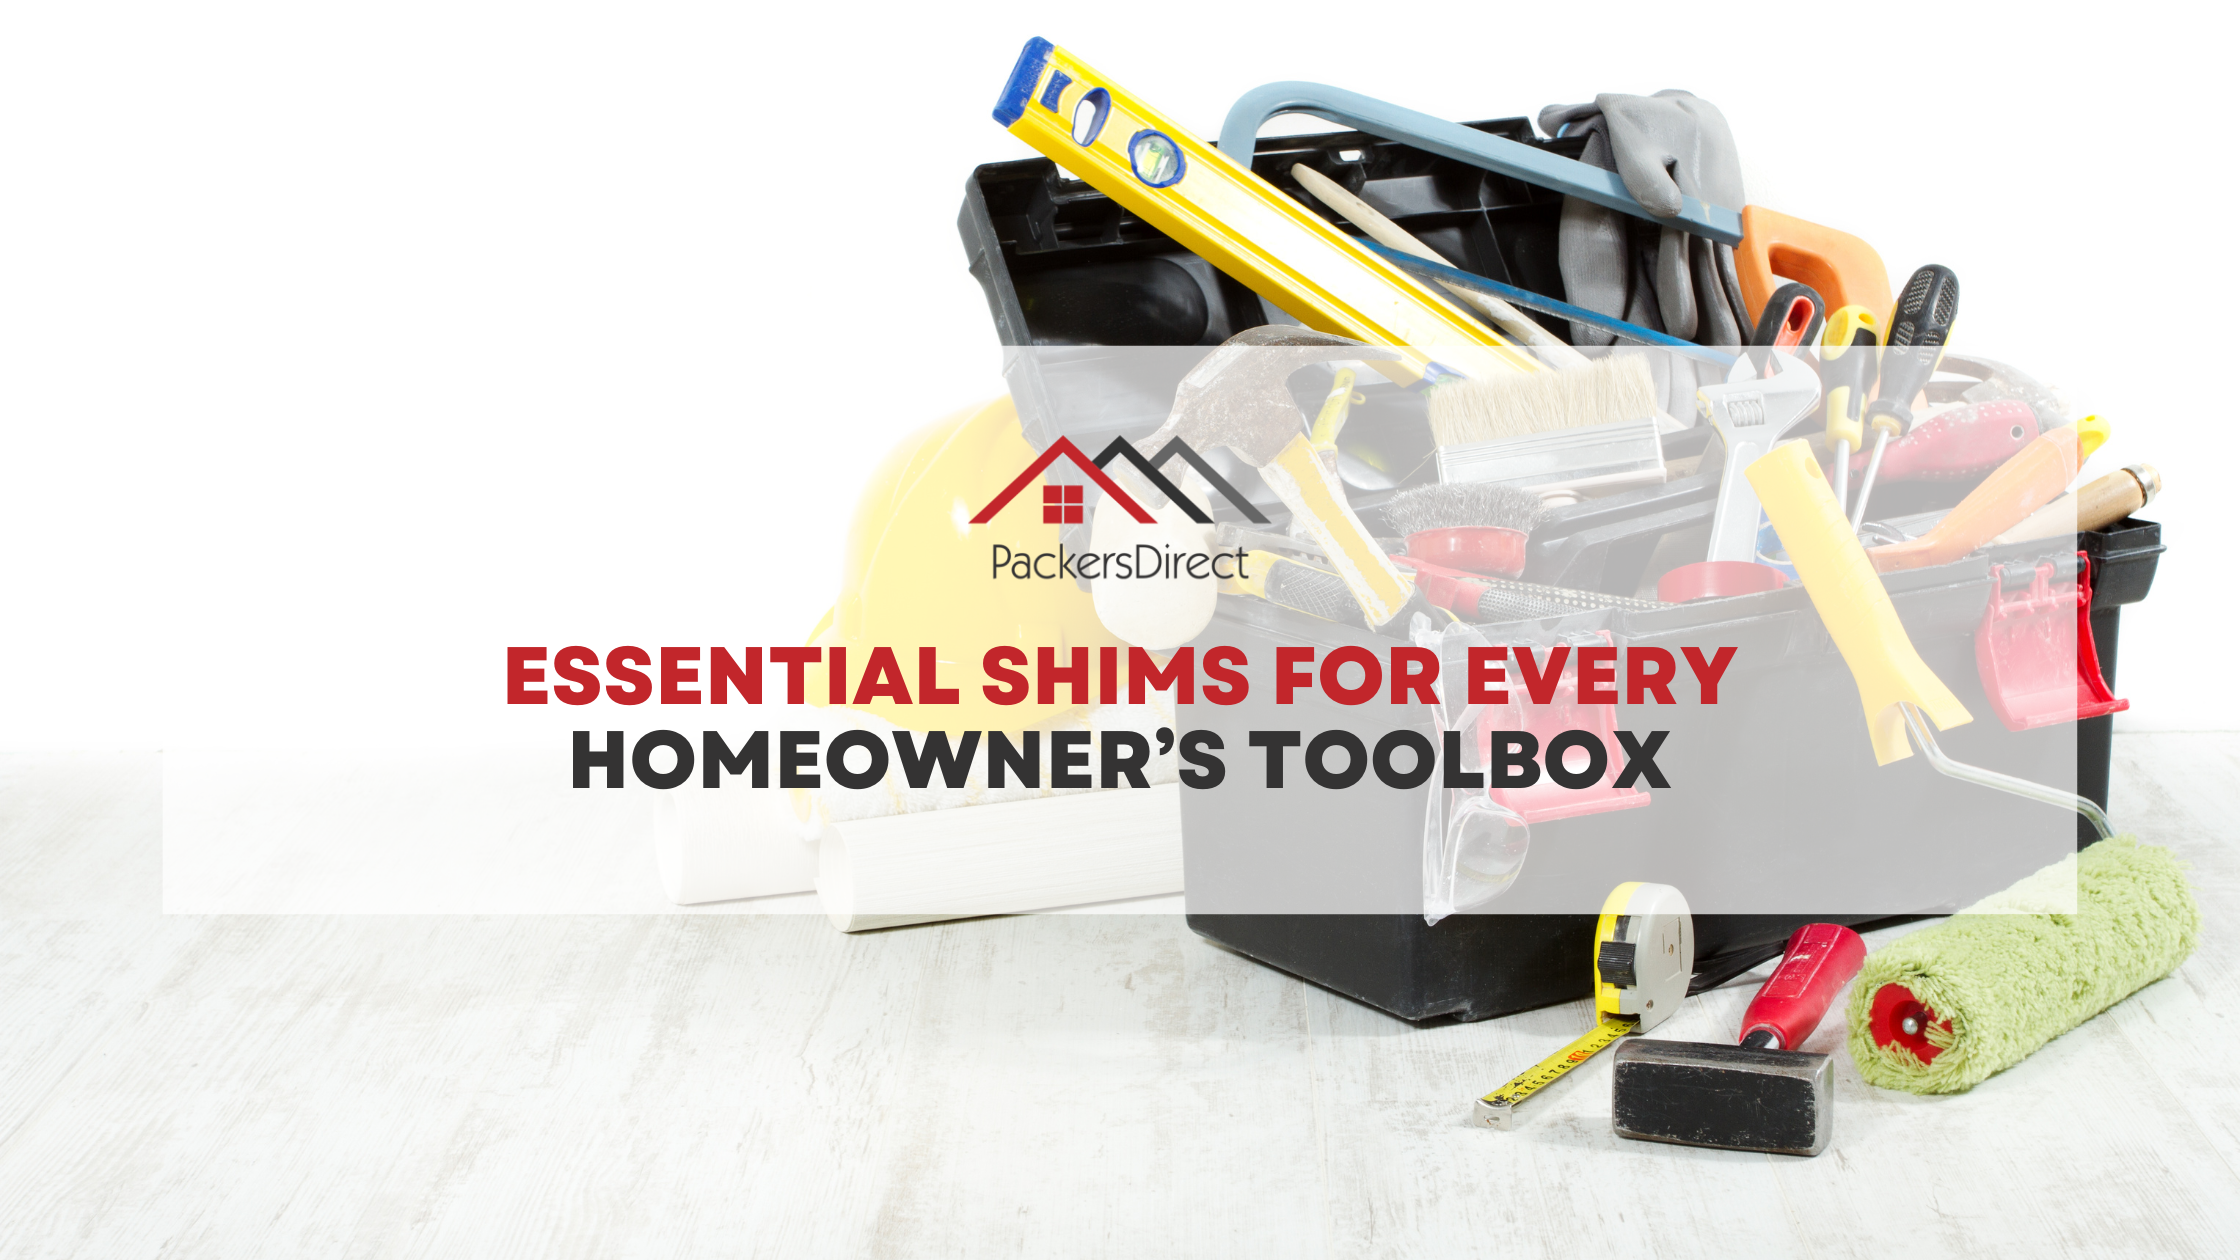 Essential Shims for Every Homeowner’s Toolbox